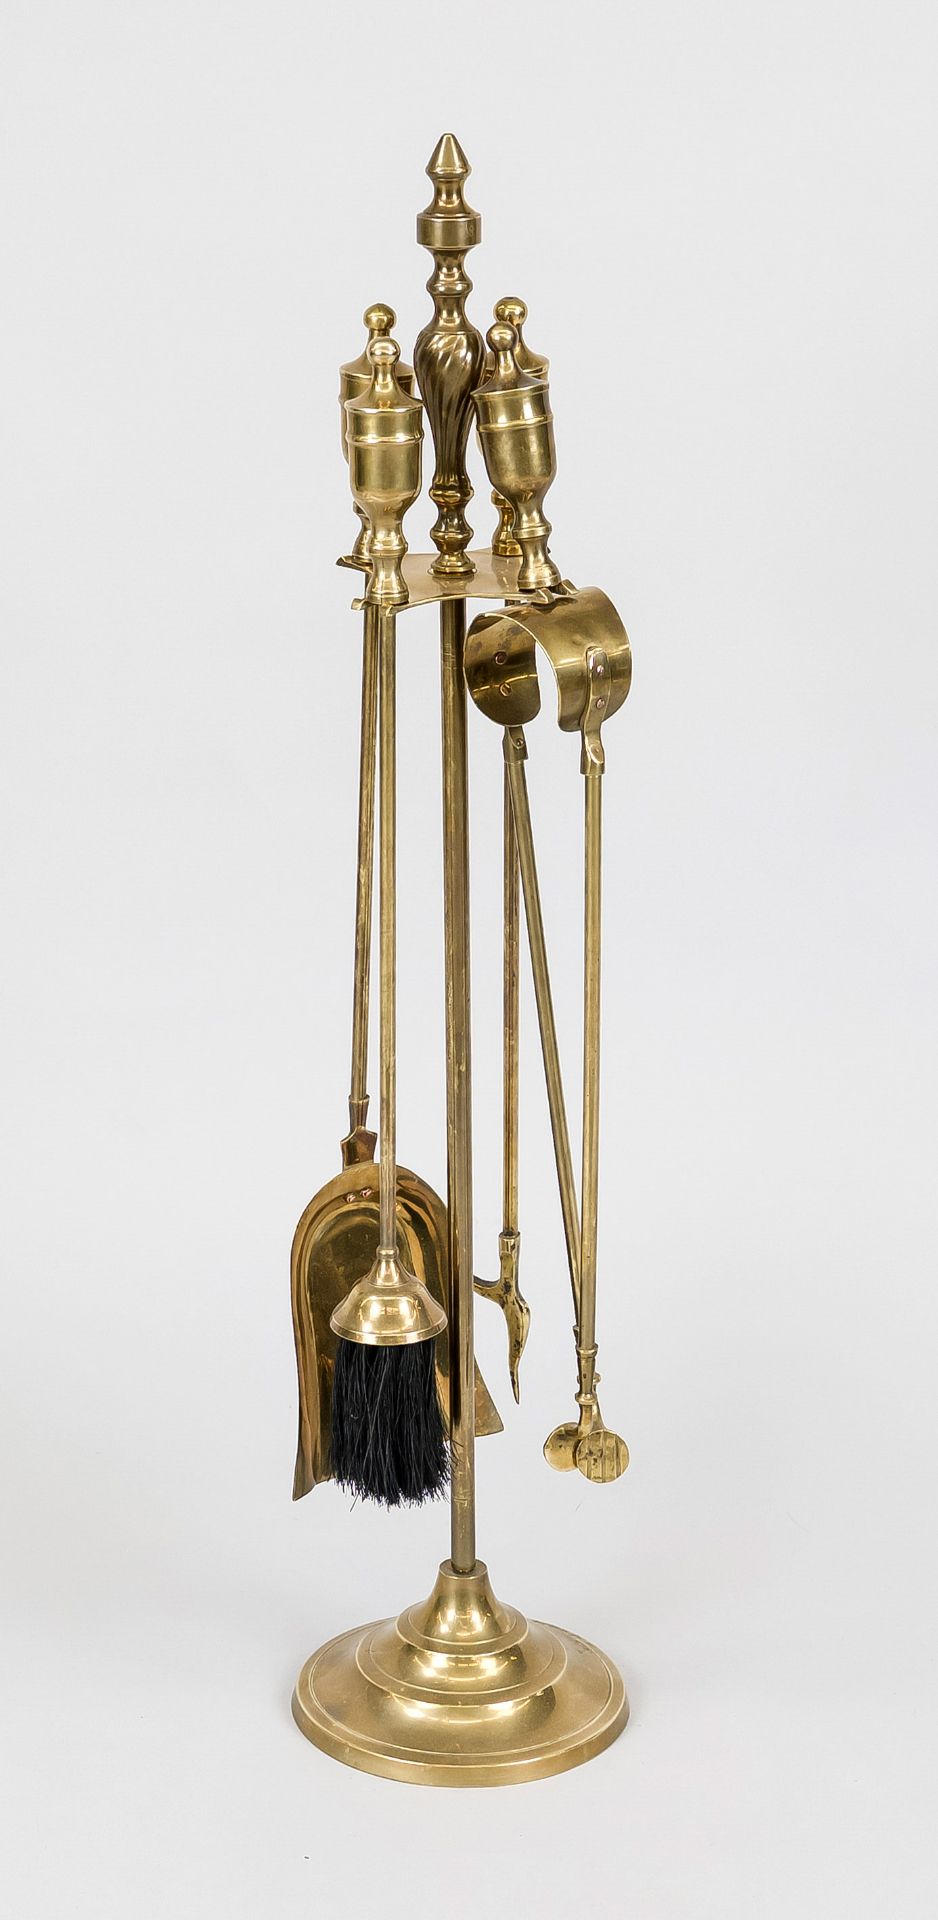 Fireplace set, mid 20th century, brass, four-piece set on stand on round foot, slightly rubbed, h.